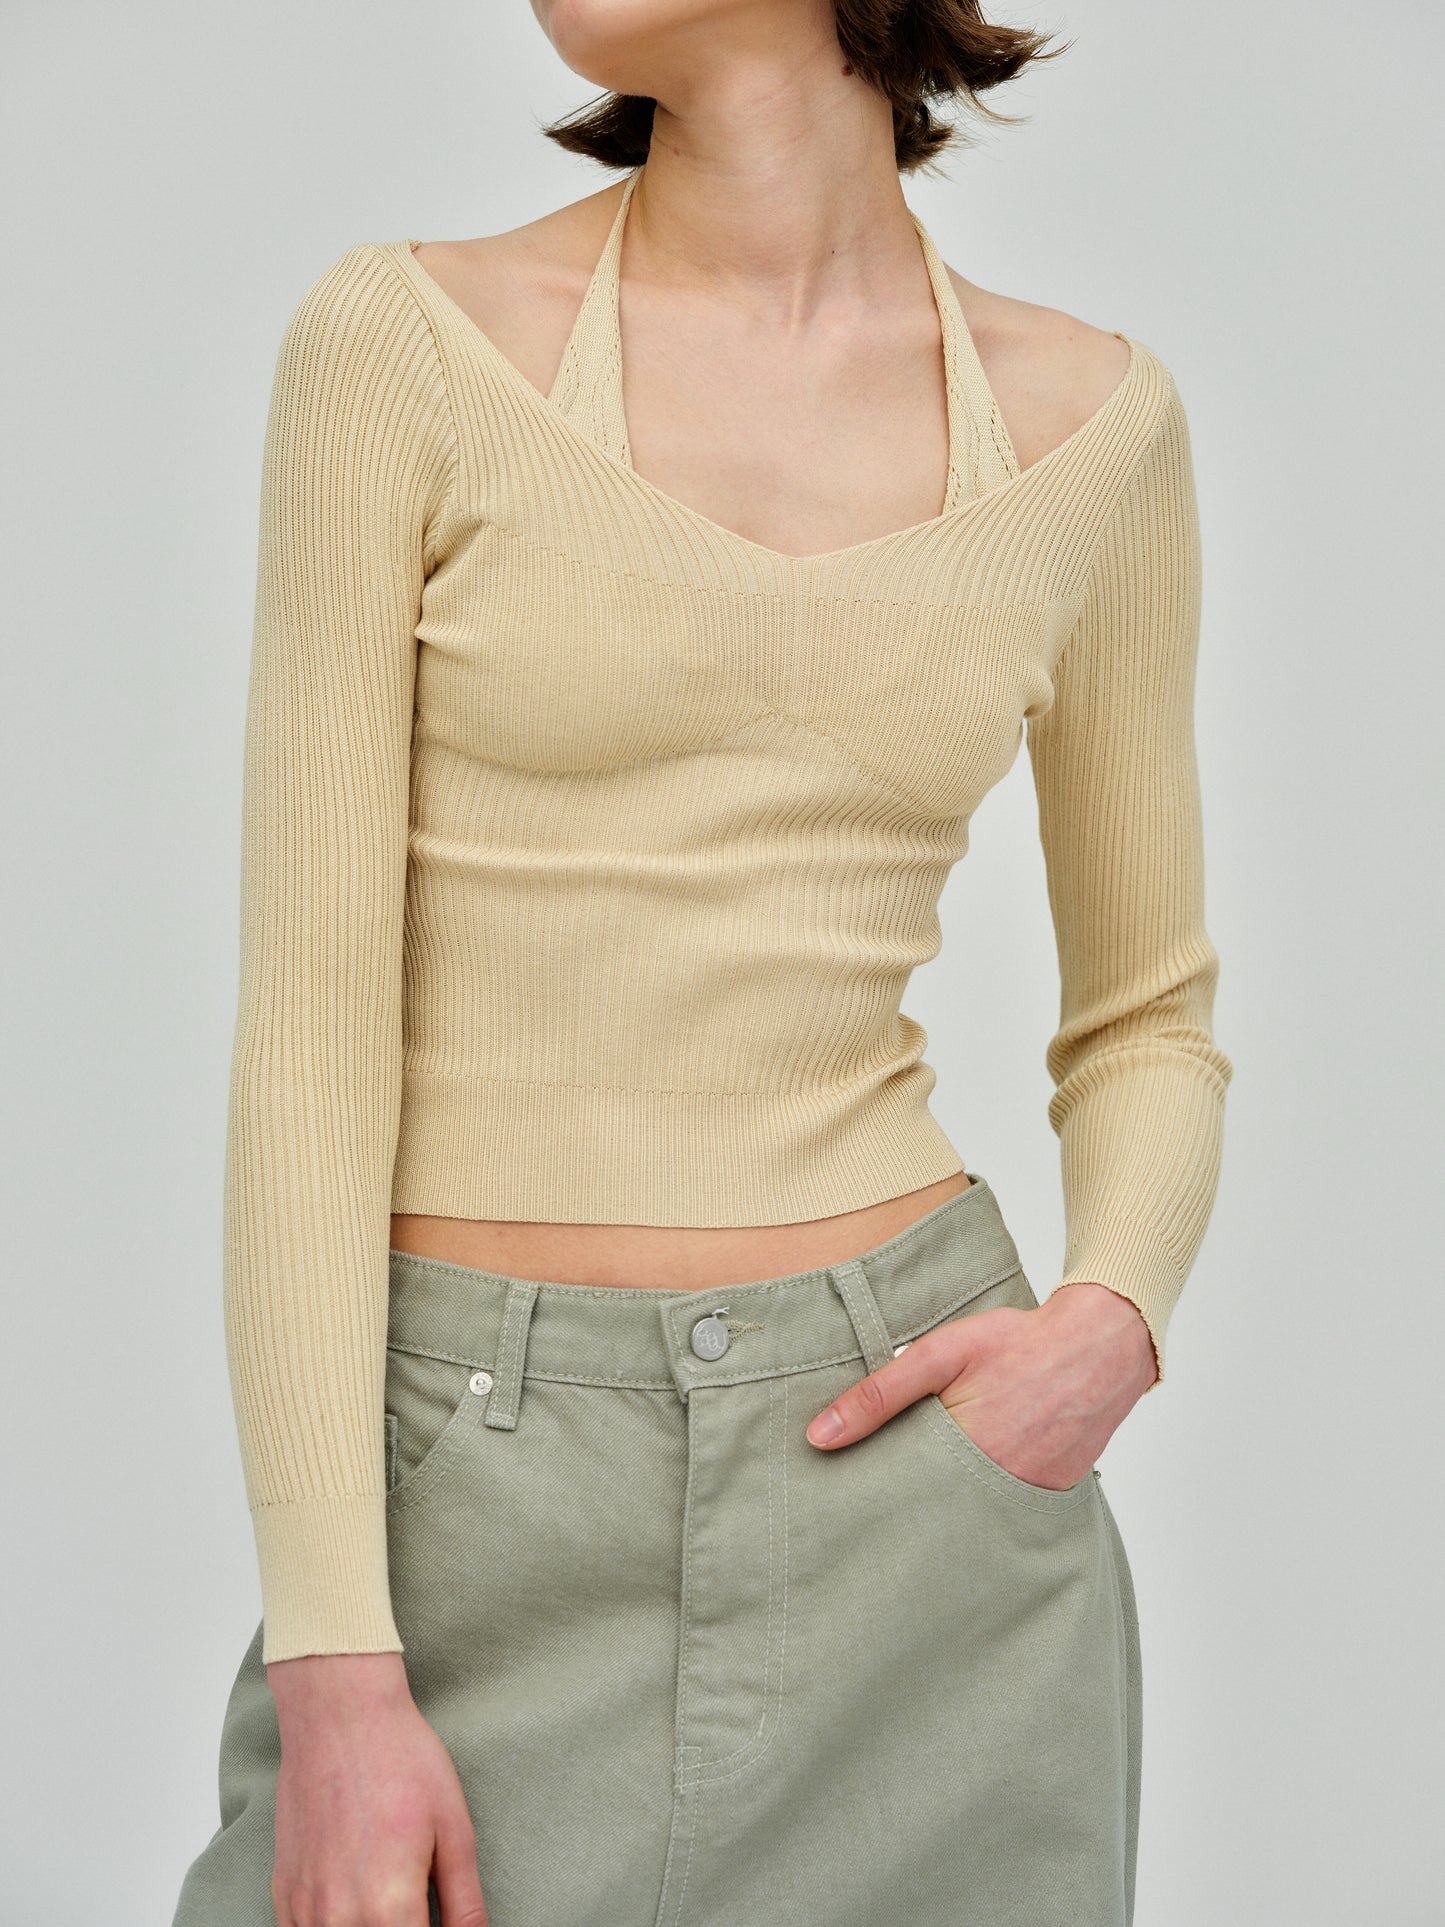 Duo Layered Knit Top, Buttermilk